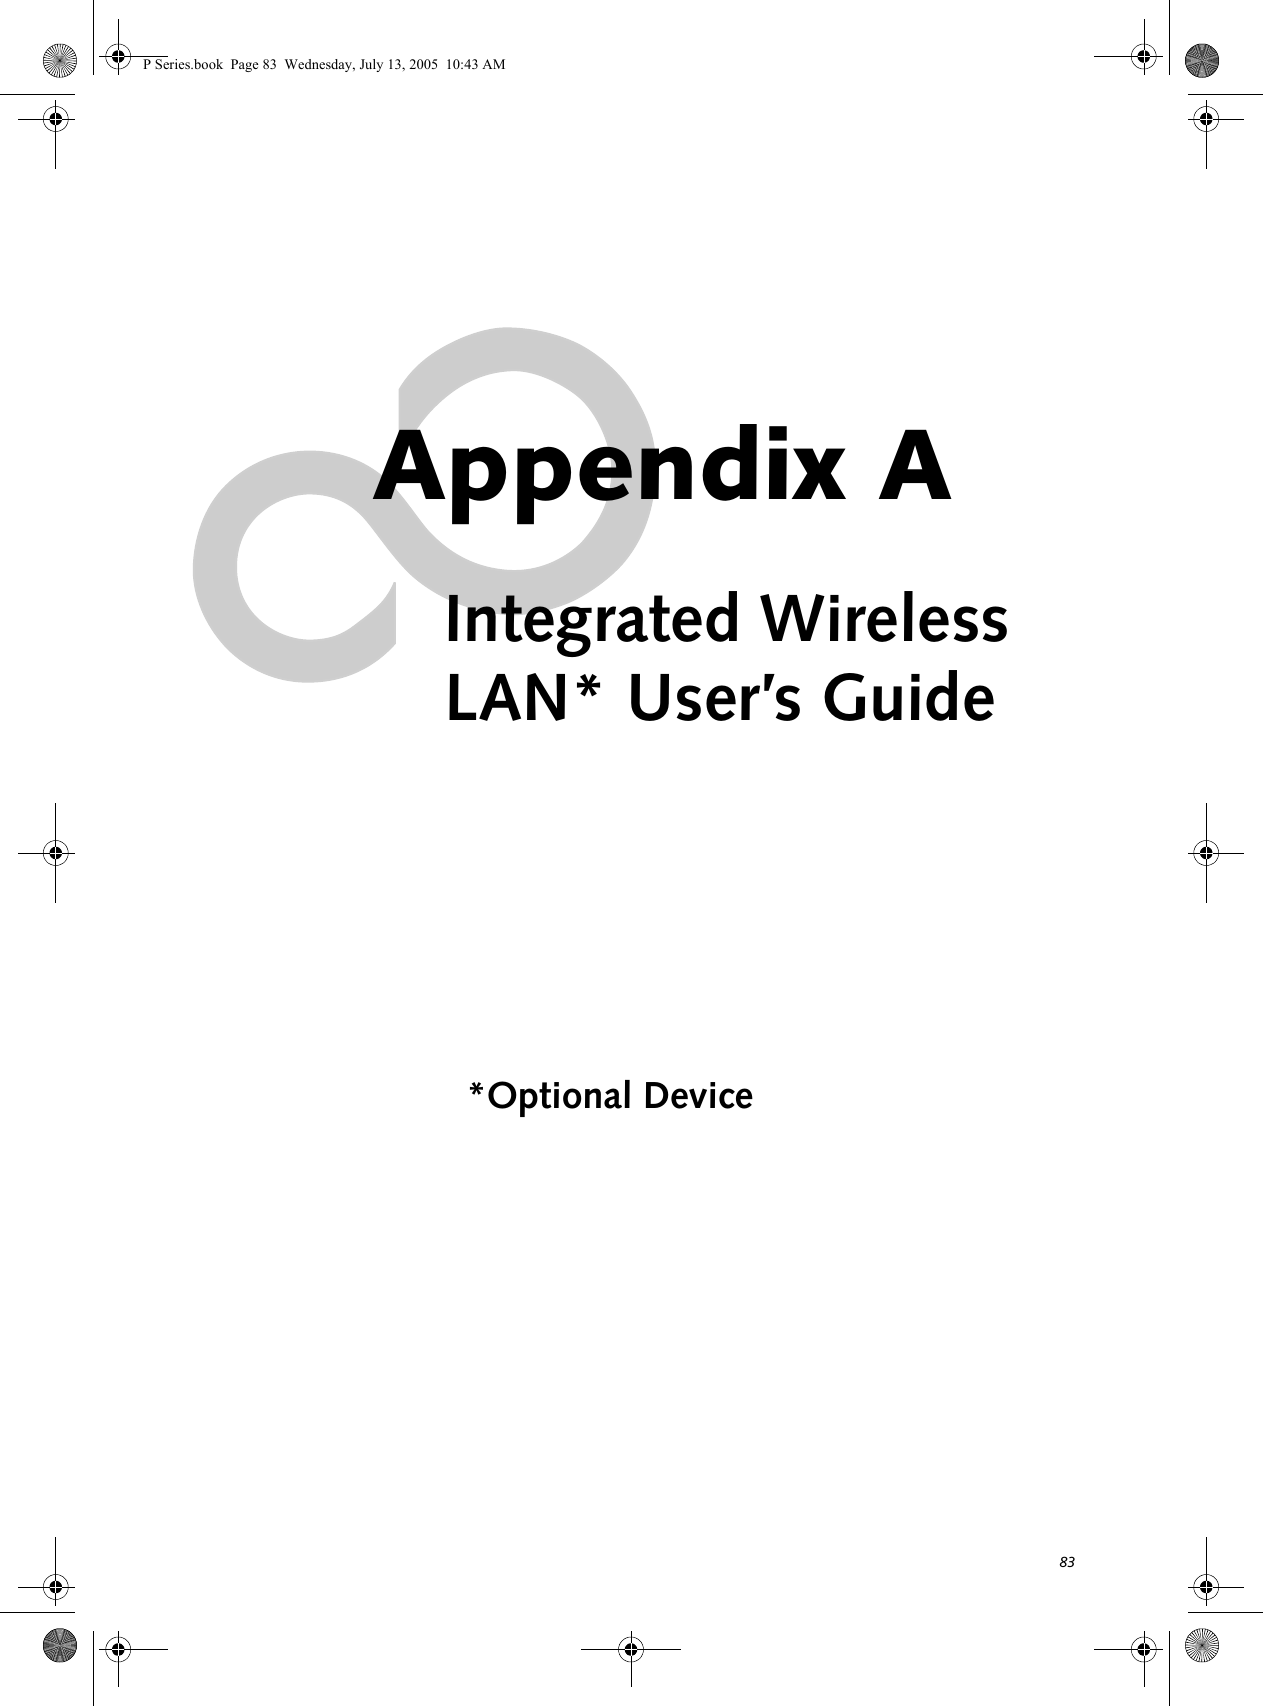 83Appendix AIntegrated WirelessLAN* User’s Guide*Optional DeviceP Series.book  Page 83  Wednesday, July 13, 2005  10:43 AM